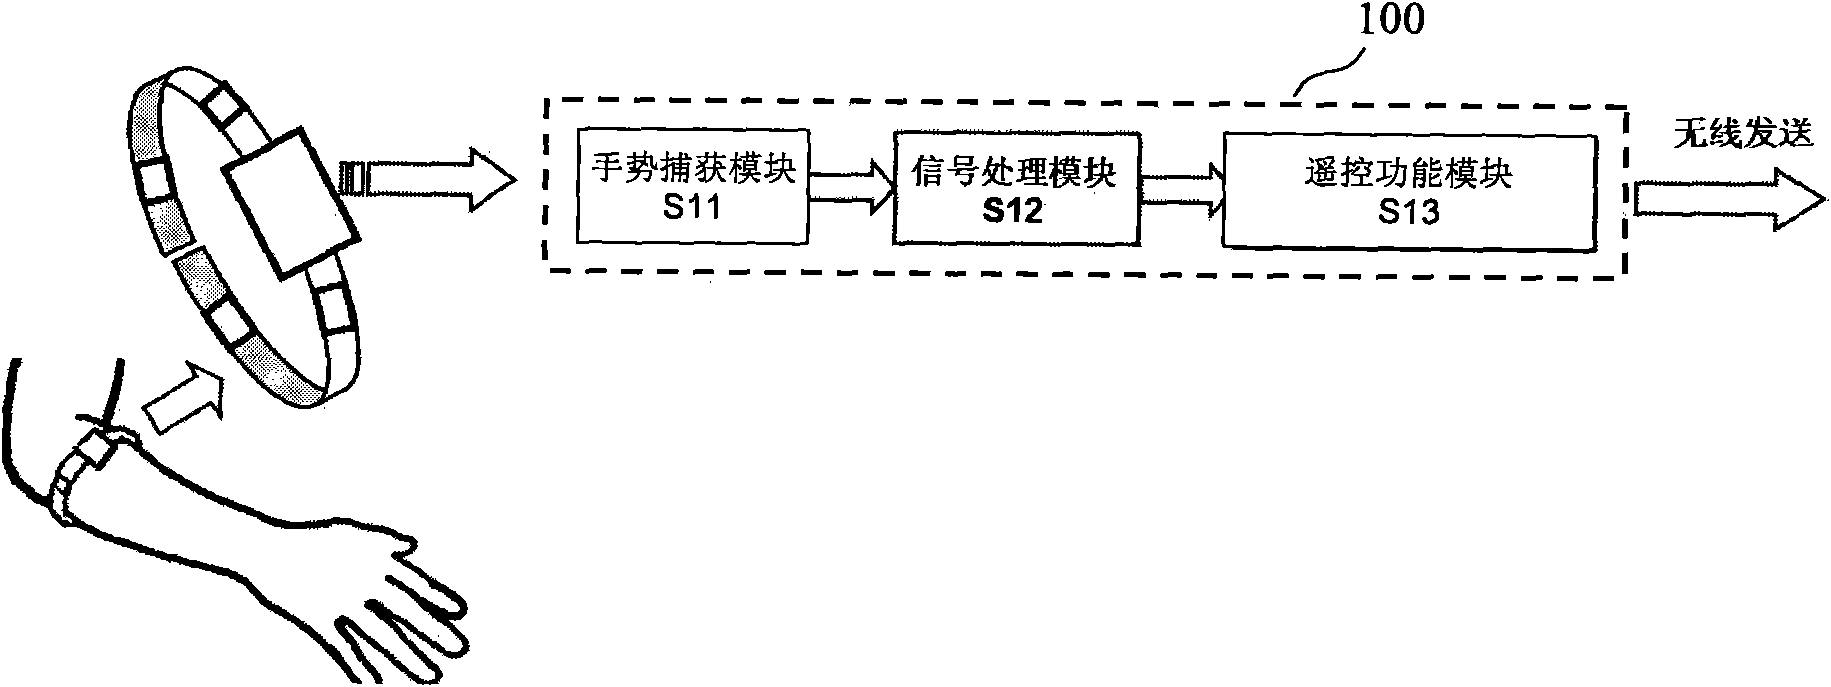 General remote control device and method for household appliances